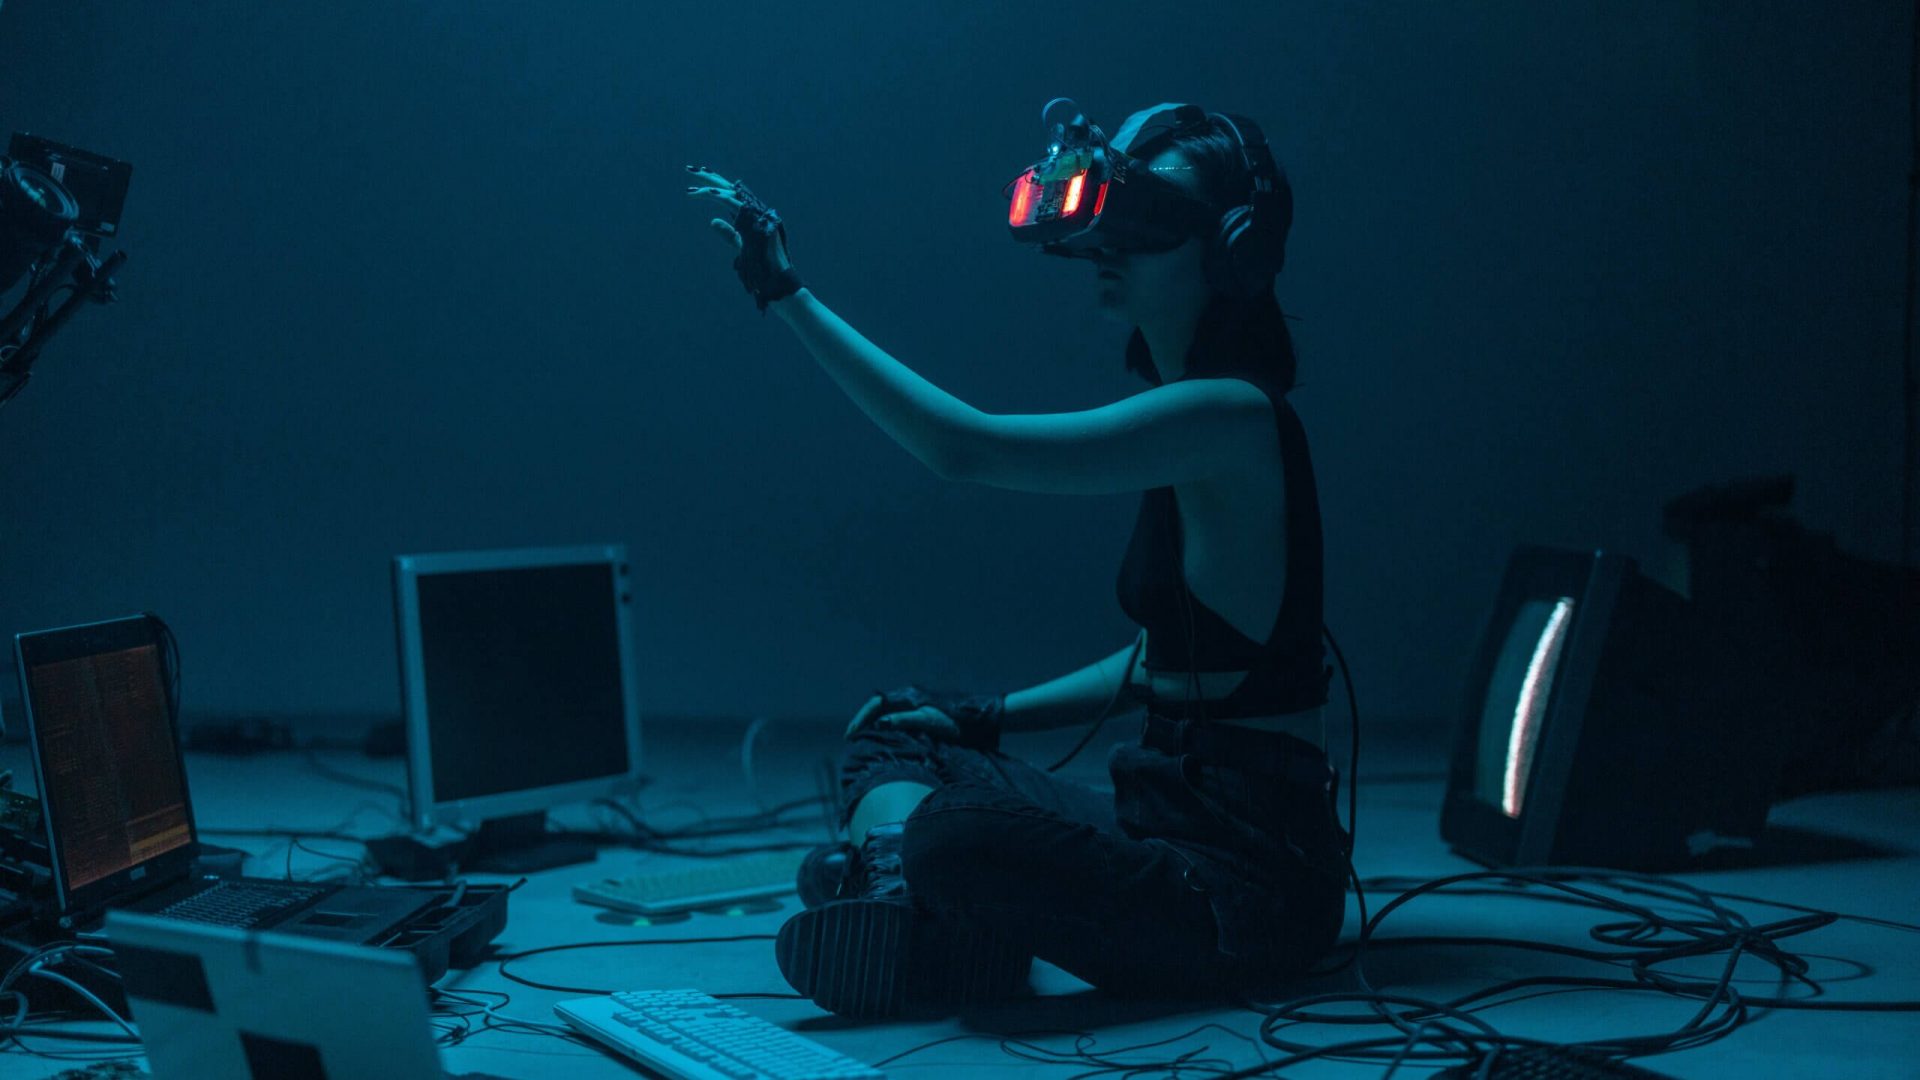 A Woman in a Tank Top Using a VR Headset